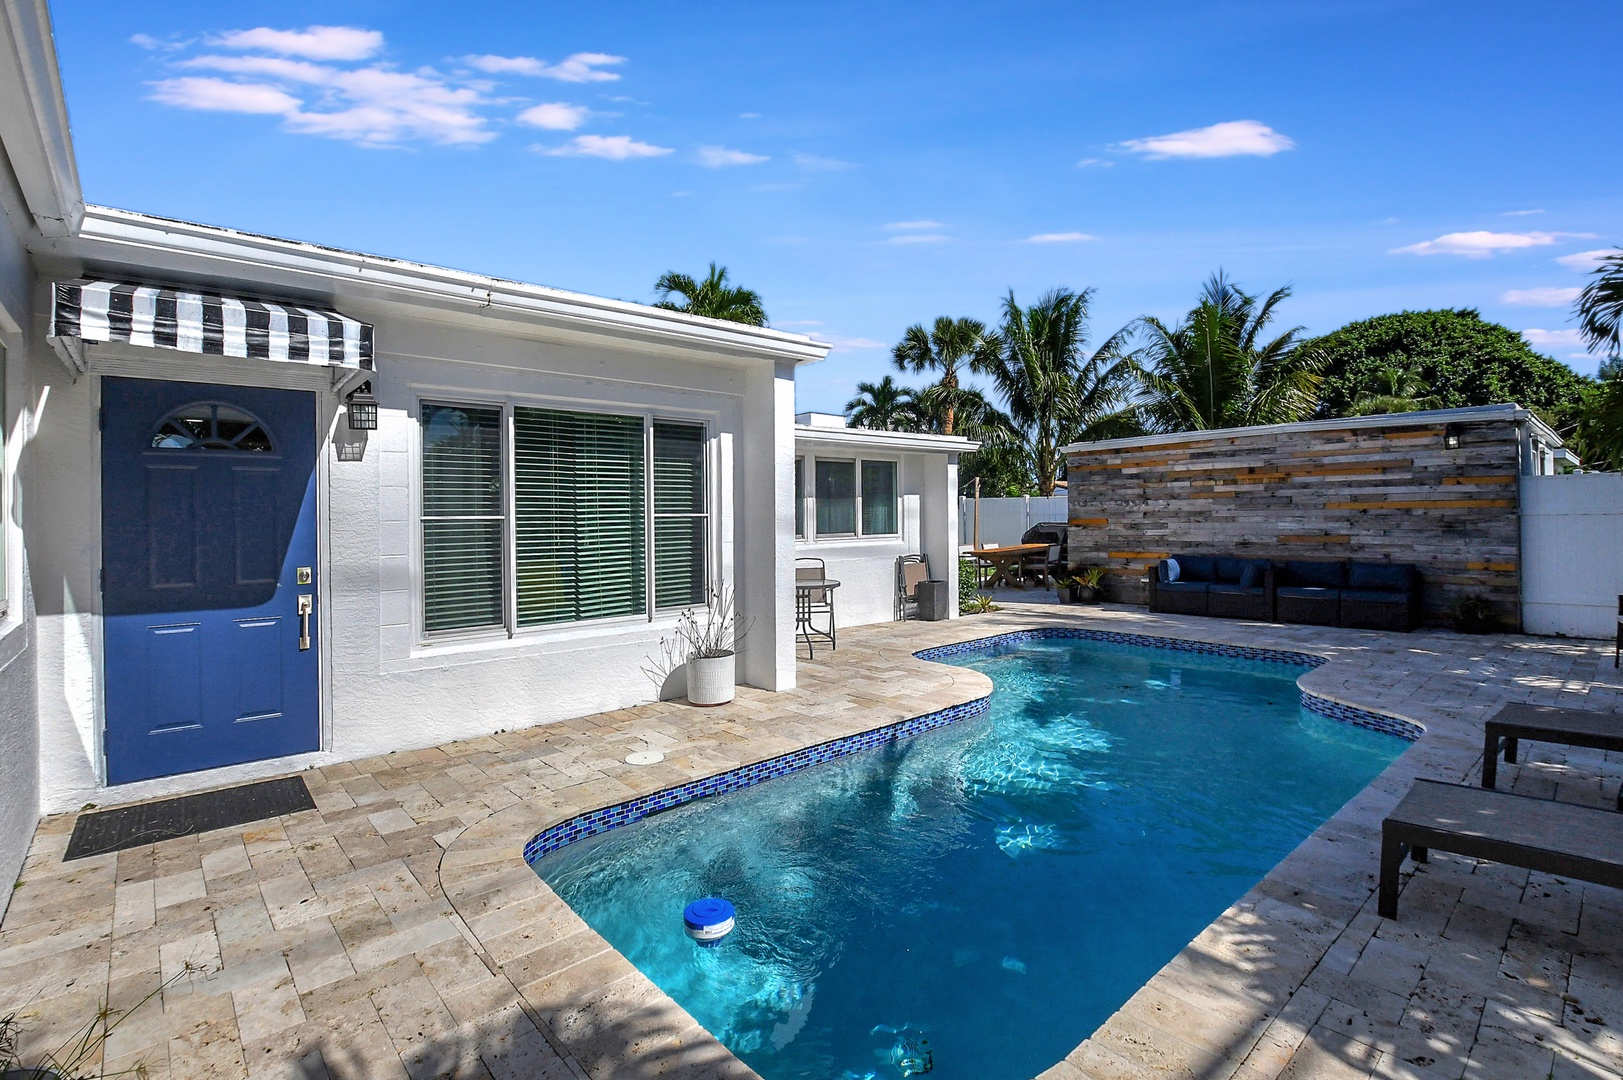 Lounge the day away poolside or make a splash in your own private pool